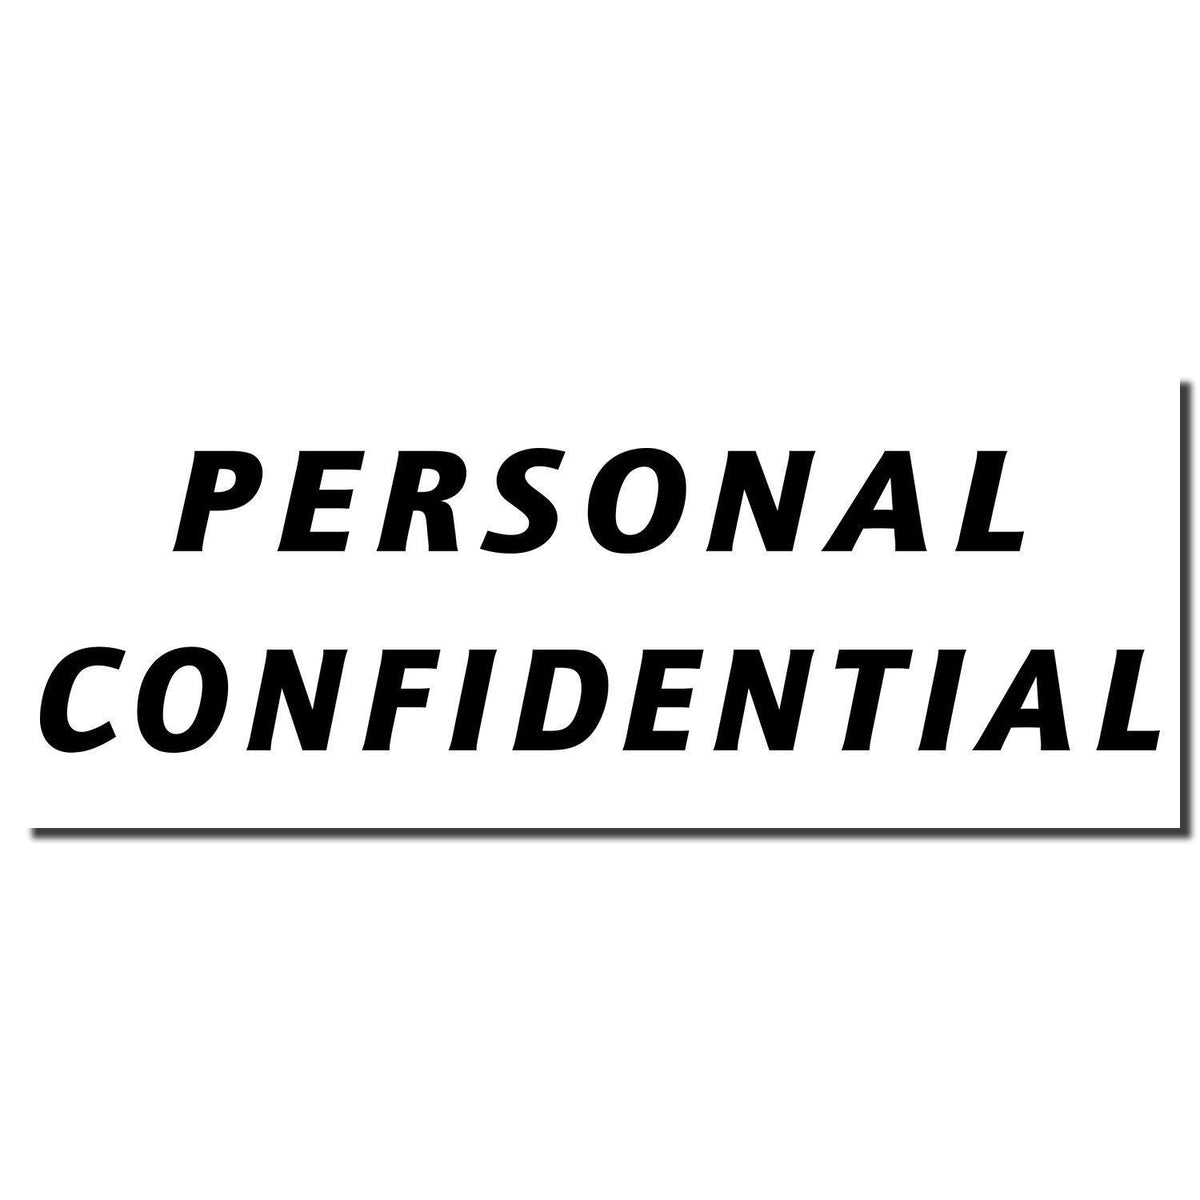 Enlarged Imprint Italic Personal Confidential Rubber Stamp Sample